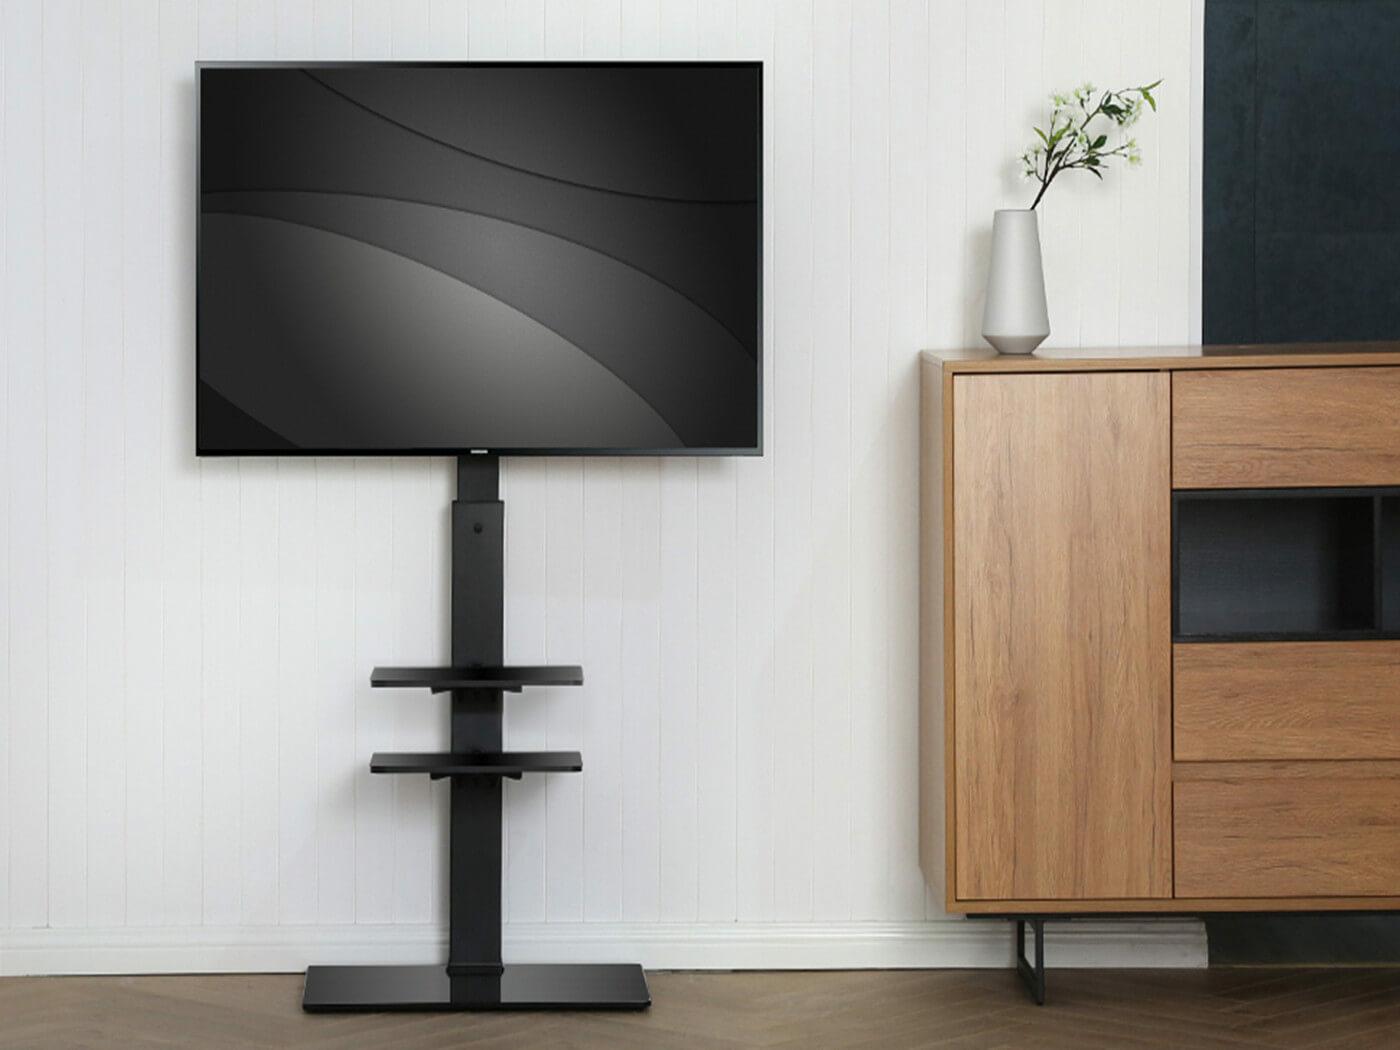 Be a Wise Floor TV Stand Buyer - FITUEYES-CA